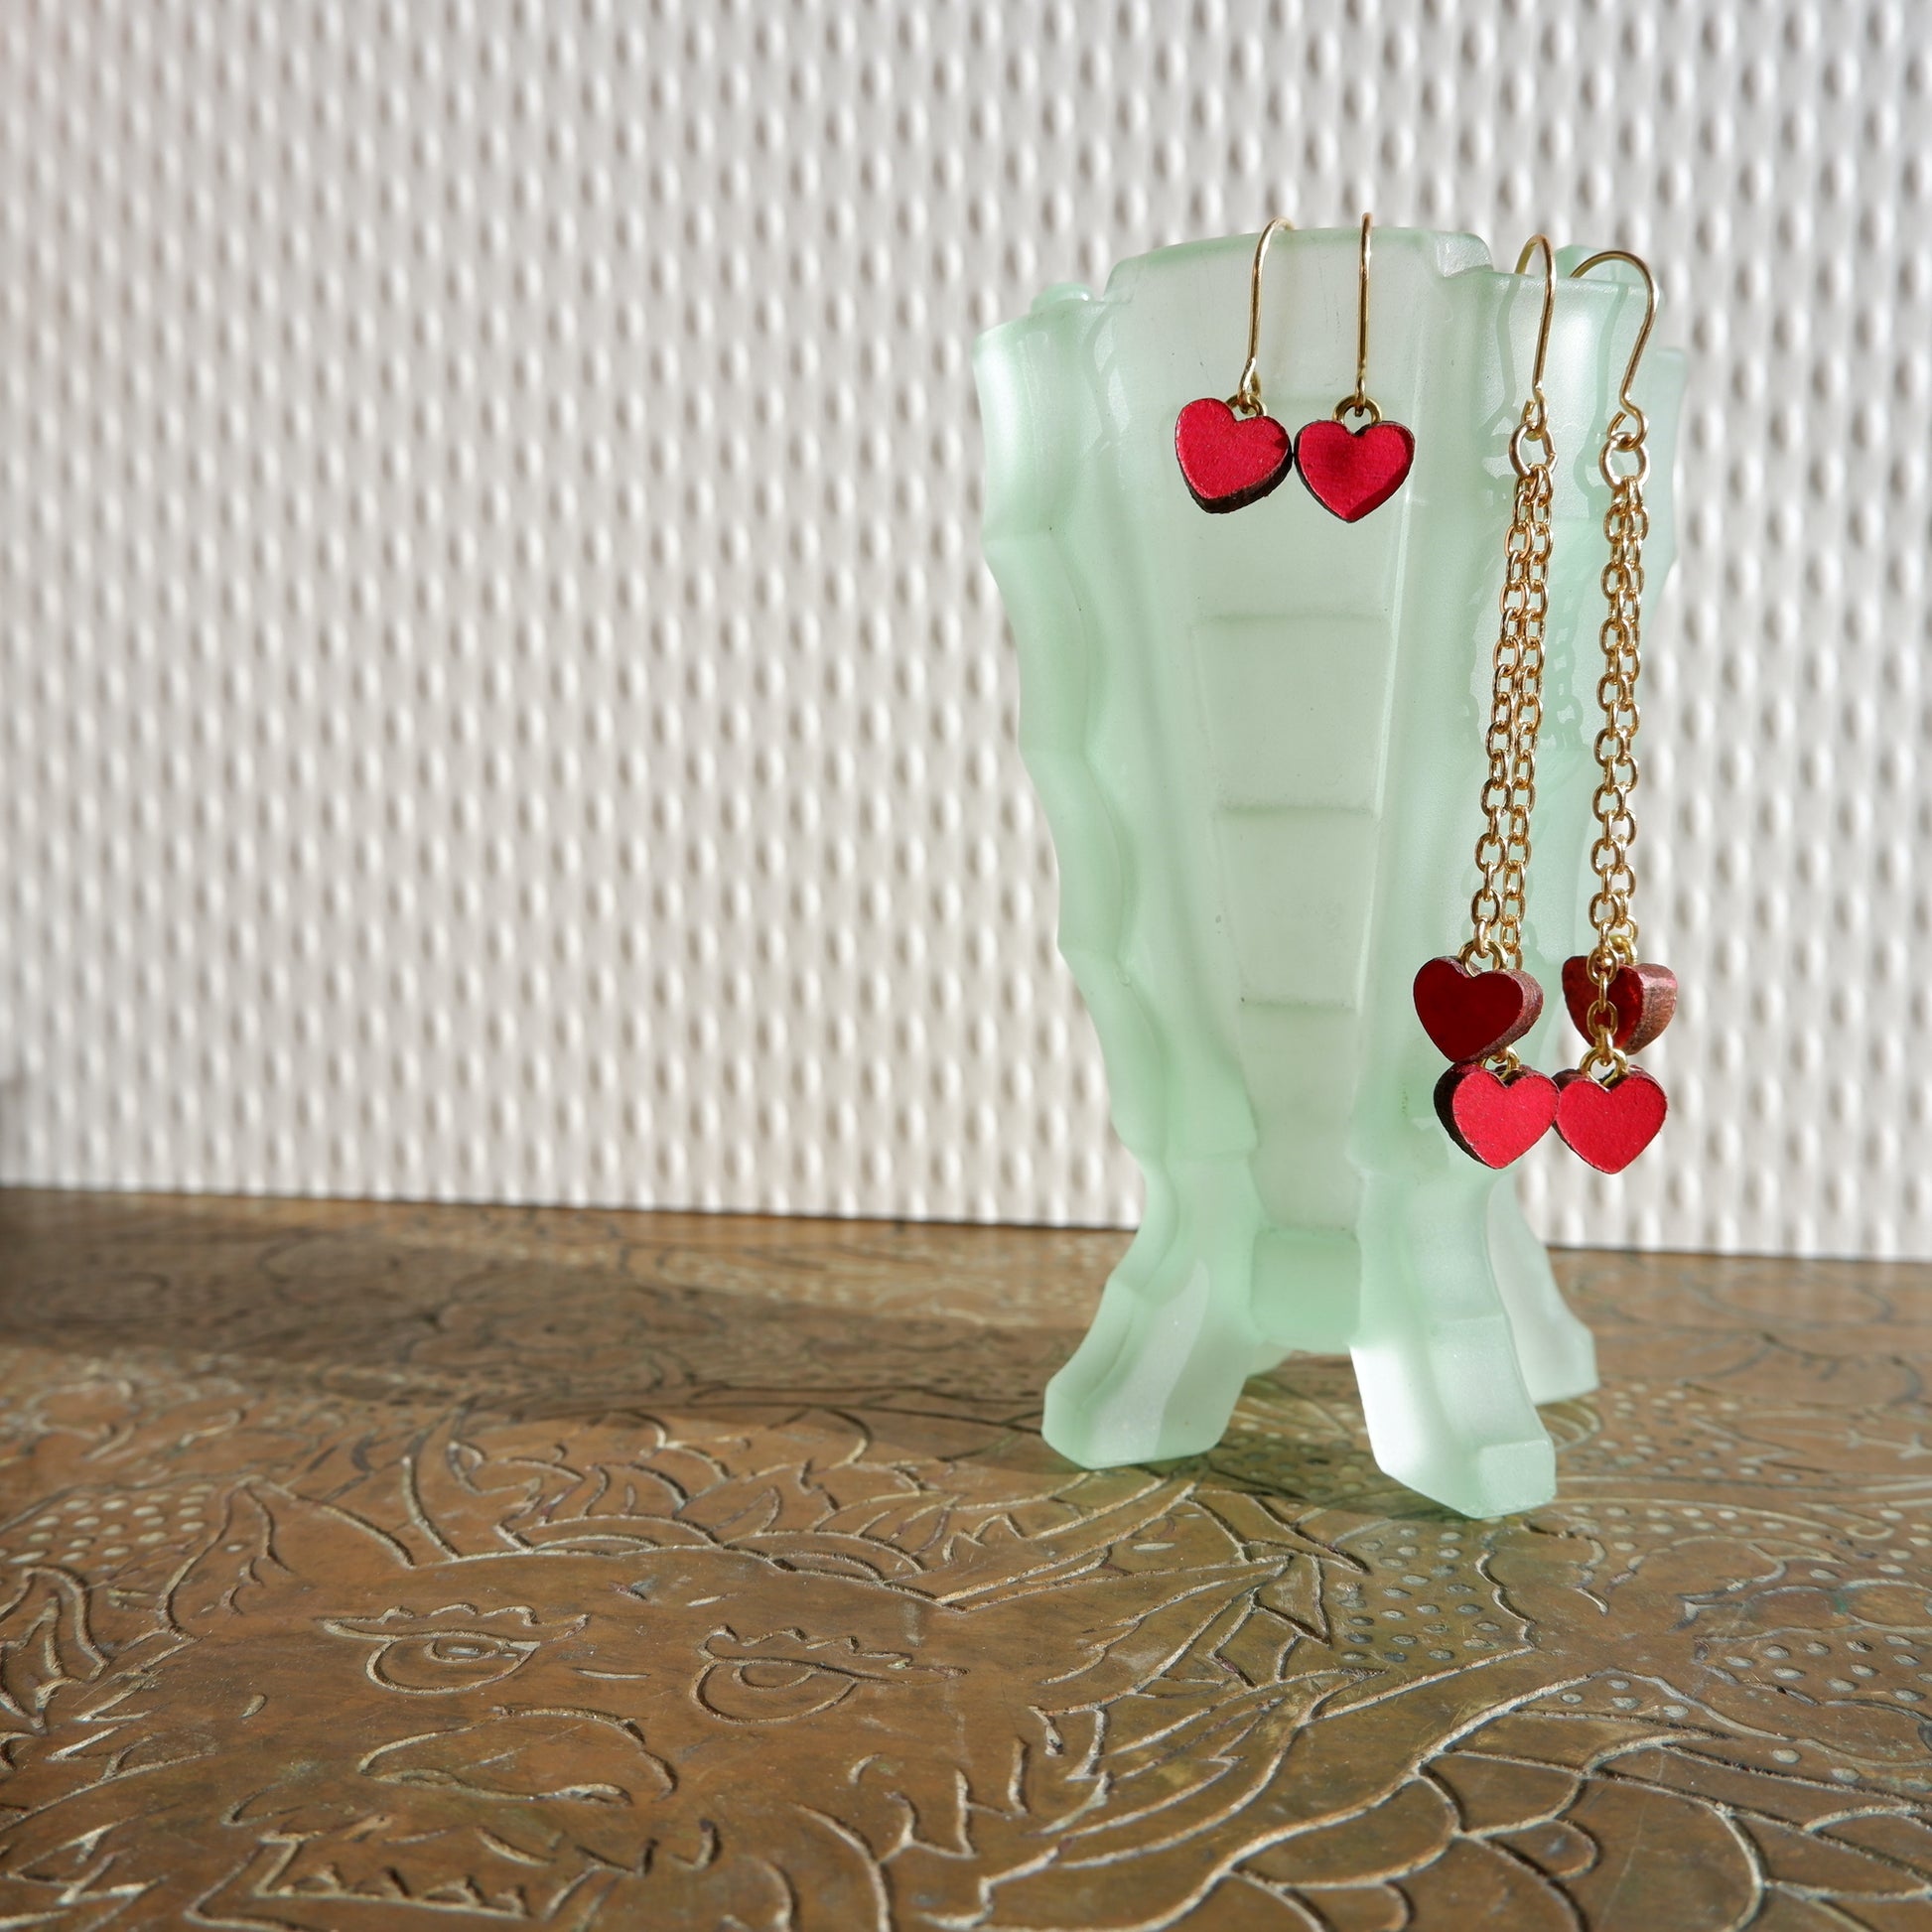 two pairs of small red leather hearts earrings hanging from a pale green vintage glass vase